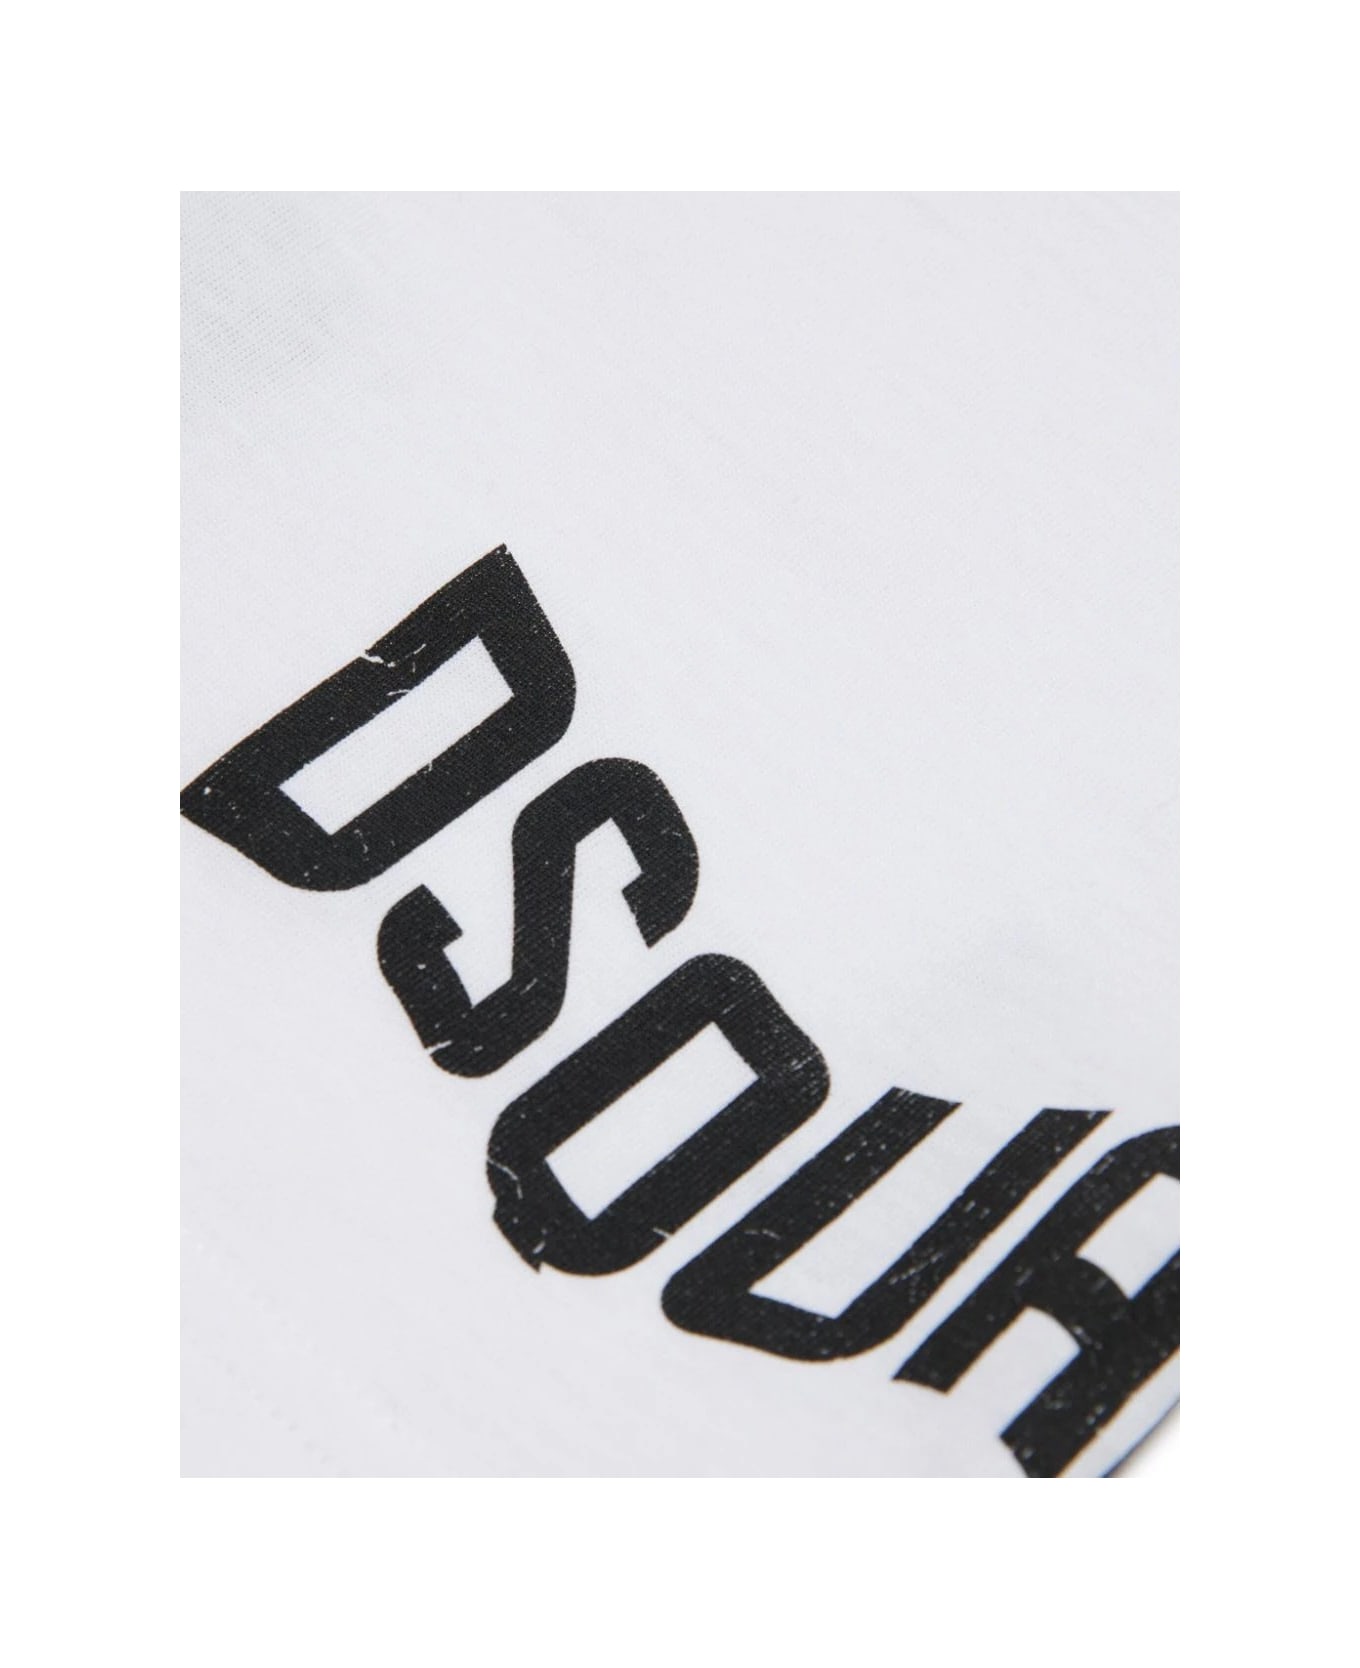 Dsquared2 White T-shirt With Wave Logo - White